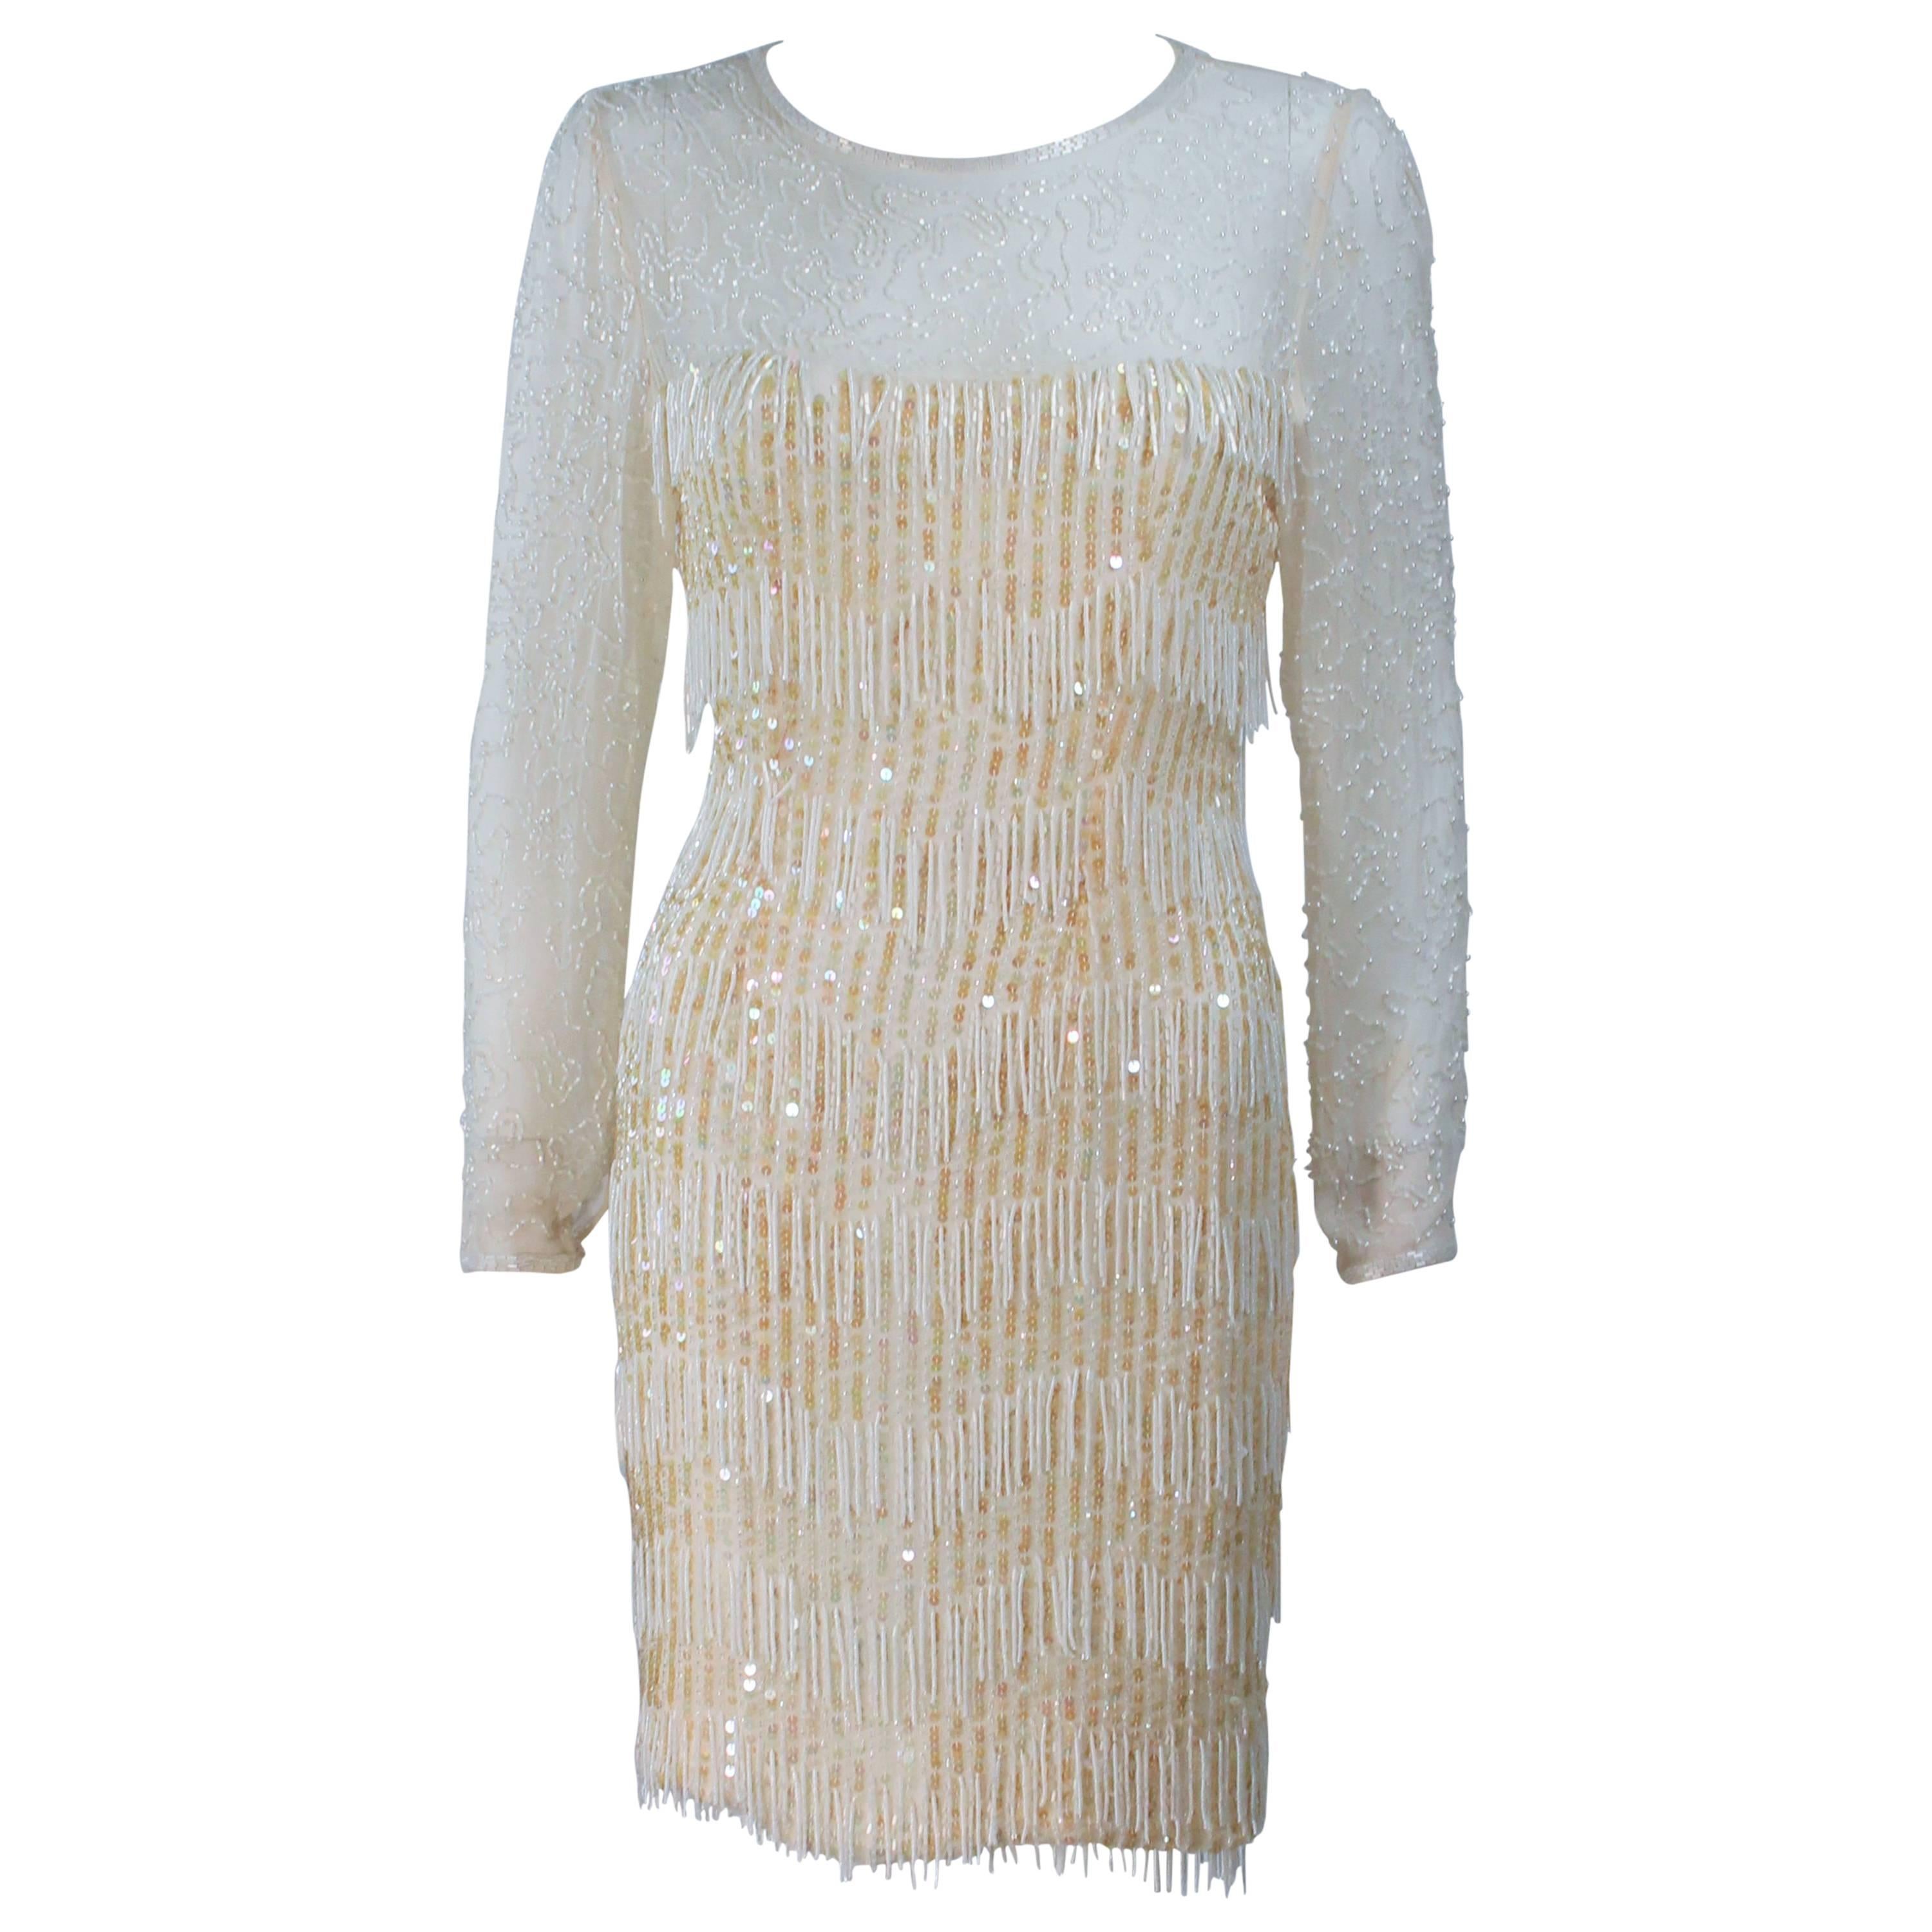 Custom Vintage Off White Cream Iridescent Cocktail Dress Size 2-4 For Sale